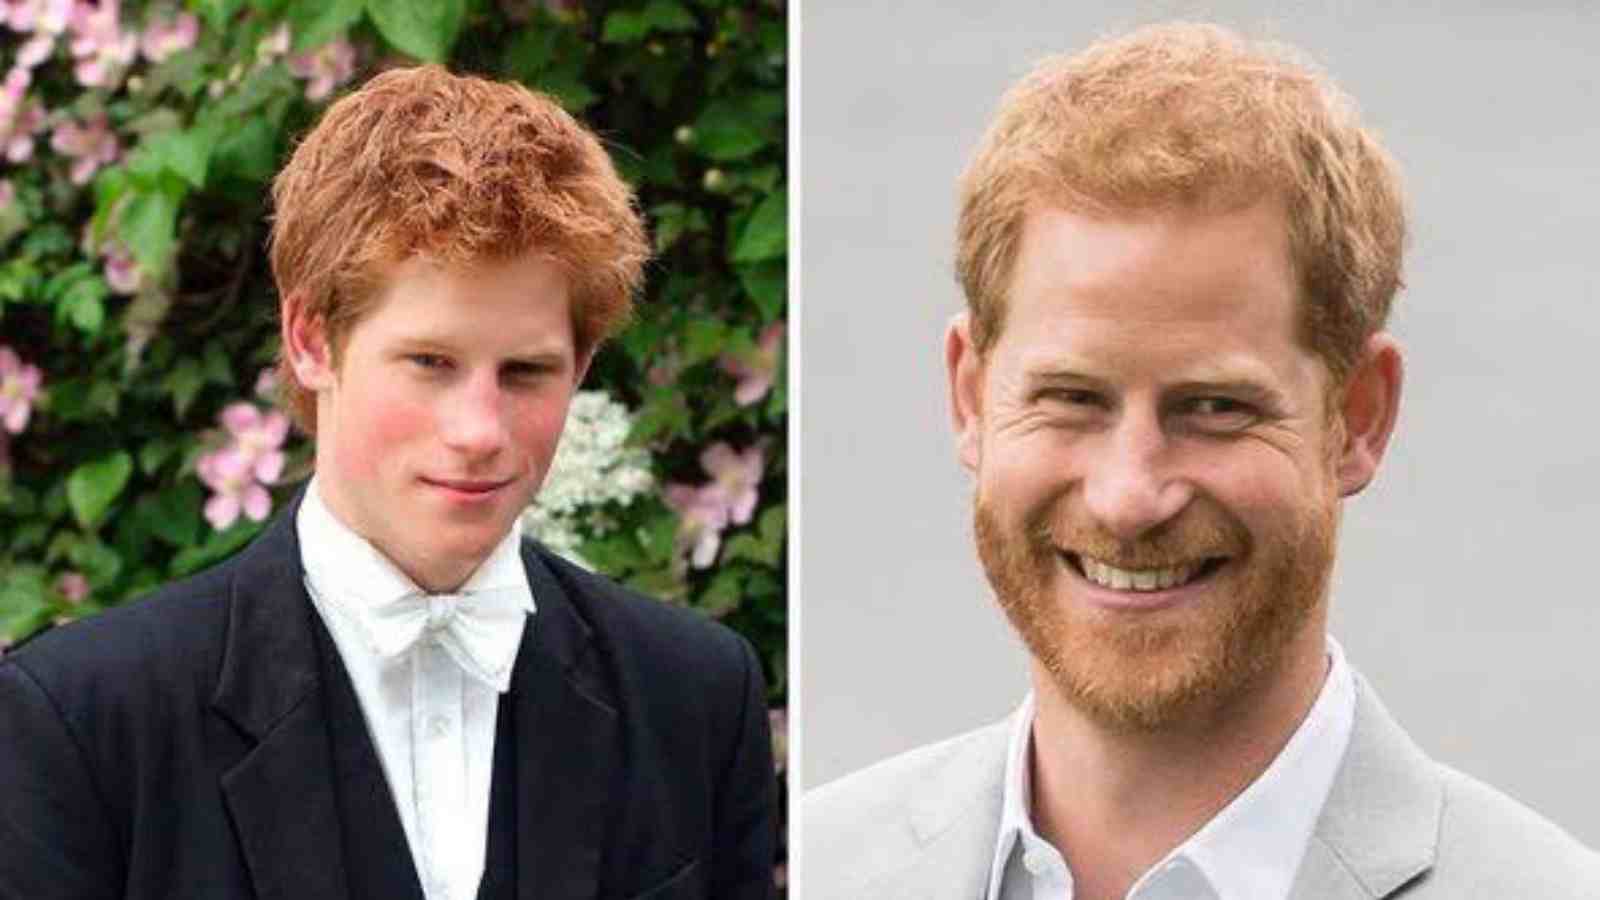 Prince Harry Introduced Meghan Markle to his Eton College Friends